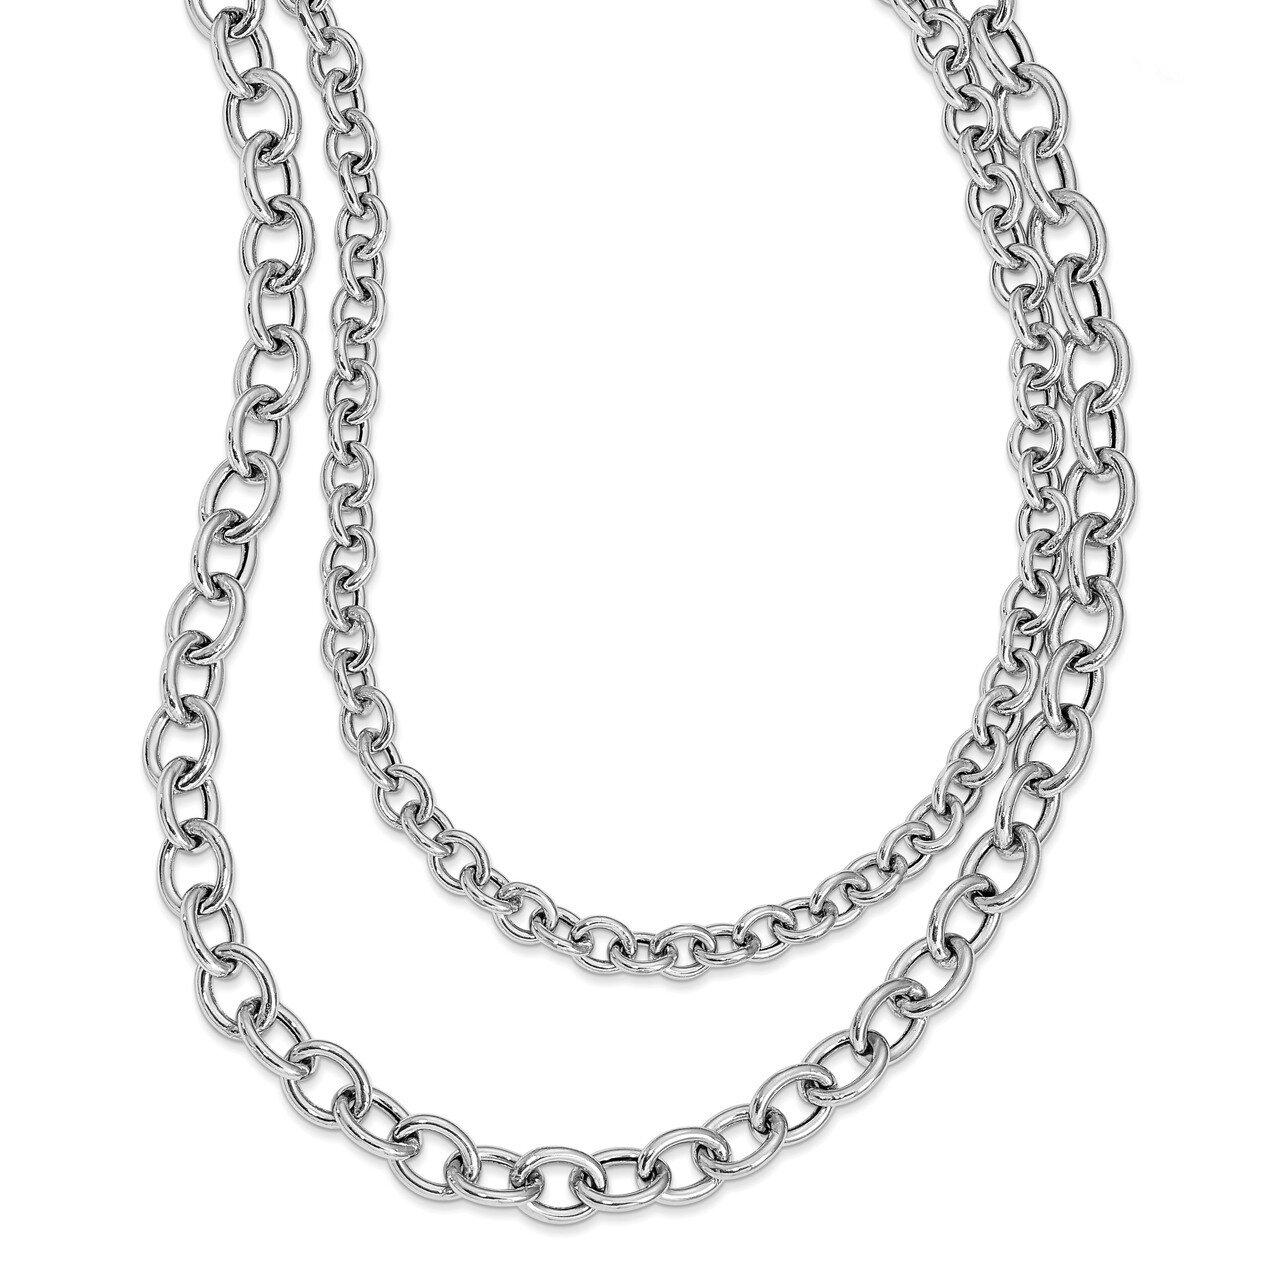 Layered with 1.5 inch extender Necklace Sterling Silver Rhodium-plated Polished HB-QLF1090-21